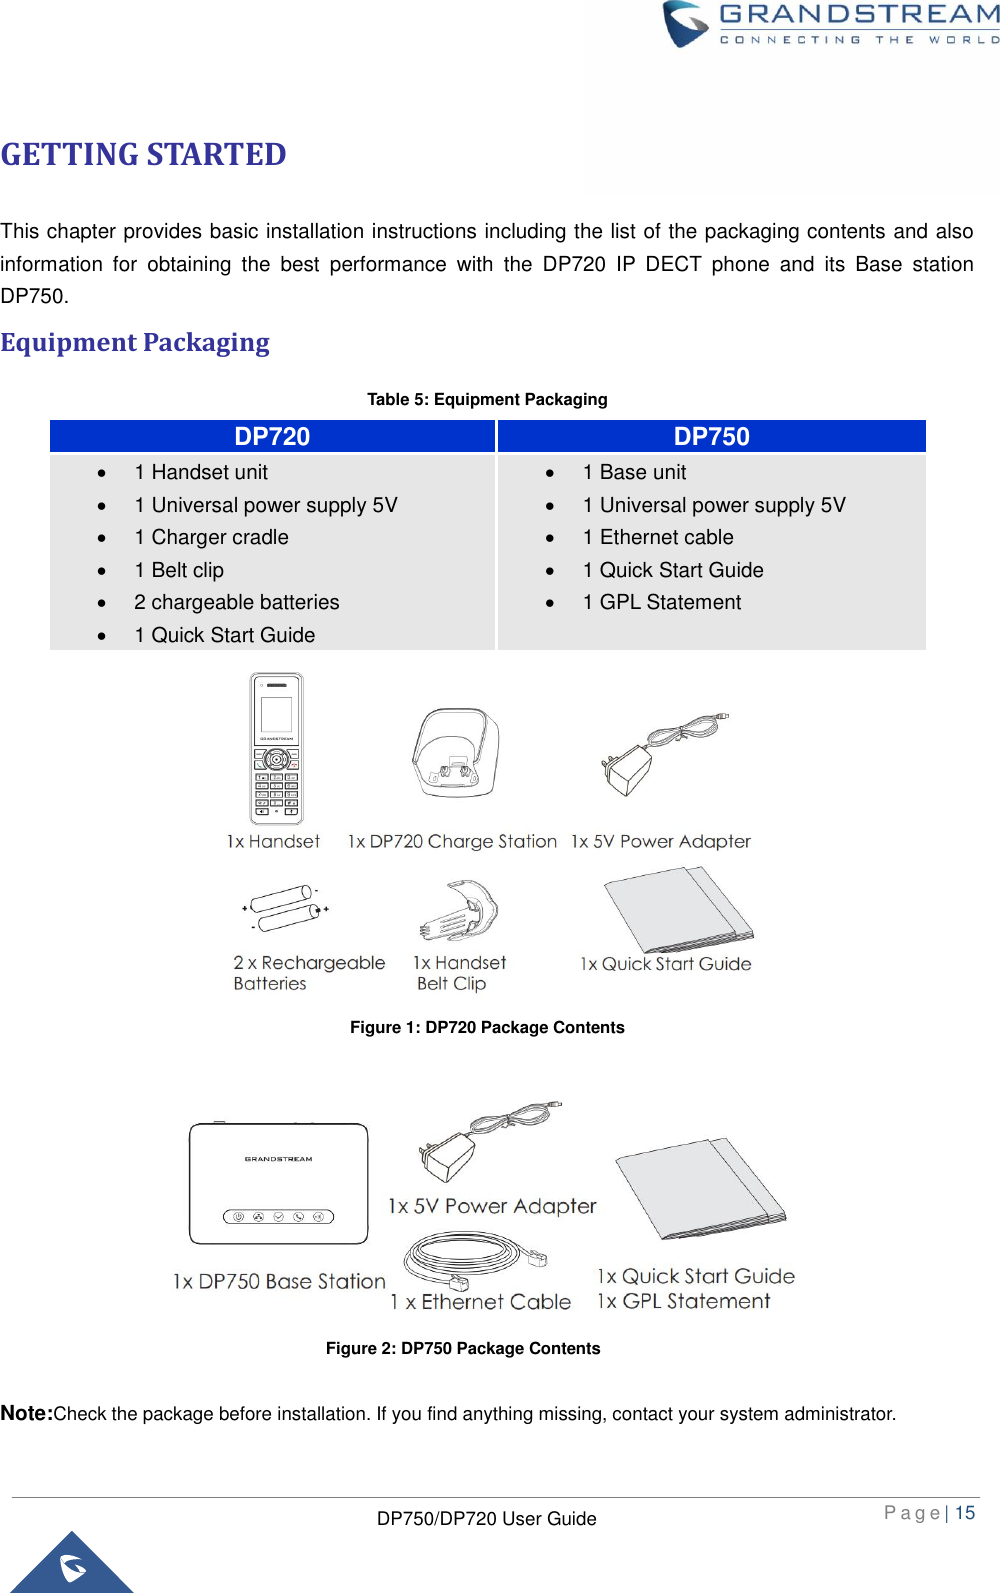  P a g e | 15  DP750/DP720 User Guide  GETTING STARTED This chapter provides basic installation instructions including the list of the packaging contents and also information  for  obtaining  the  best  performance  with  the  DP720  IP  DECT  phone  and  its  Base  station DP750.   Equipment Packaging Table 5: Equipment Packaging  Figure 1: DP720 Package Contents           Note:Check the package before installation. If you find anything missing, contact your system administrator. DP720 DP750   1 Handset unit   1 Universal power supply 5V   1 Charger cradle   1 Belt clip   2 chargeable batteries  1 Quick Start Guide   1 Base unit   1 Universal power supply 5V   1 Ethernet cable  1 Quick Start Guide   1 GPL Statement Figure 2: DP750 Package Contents 